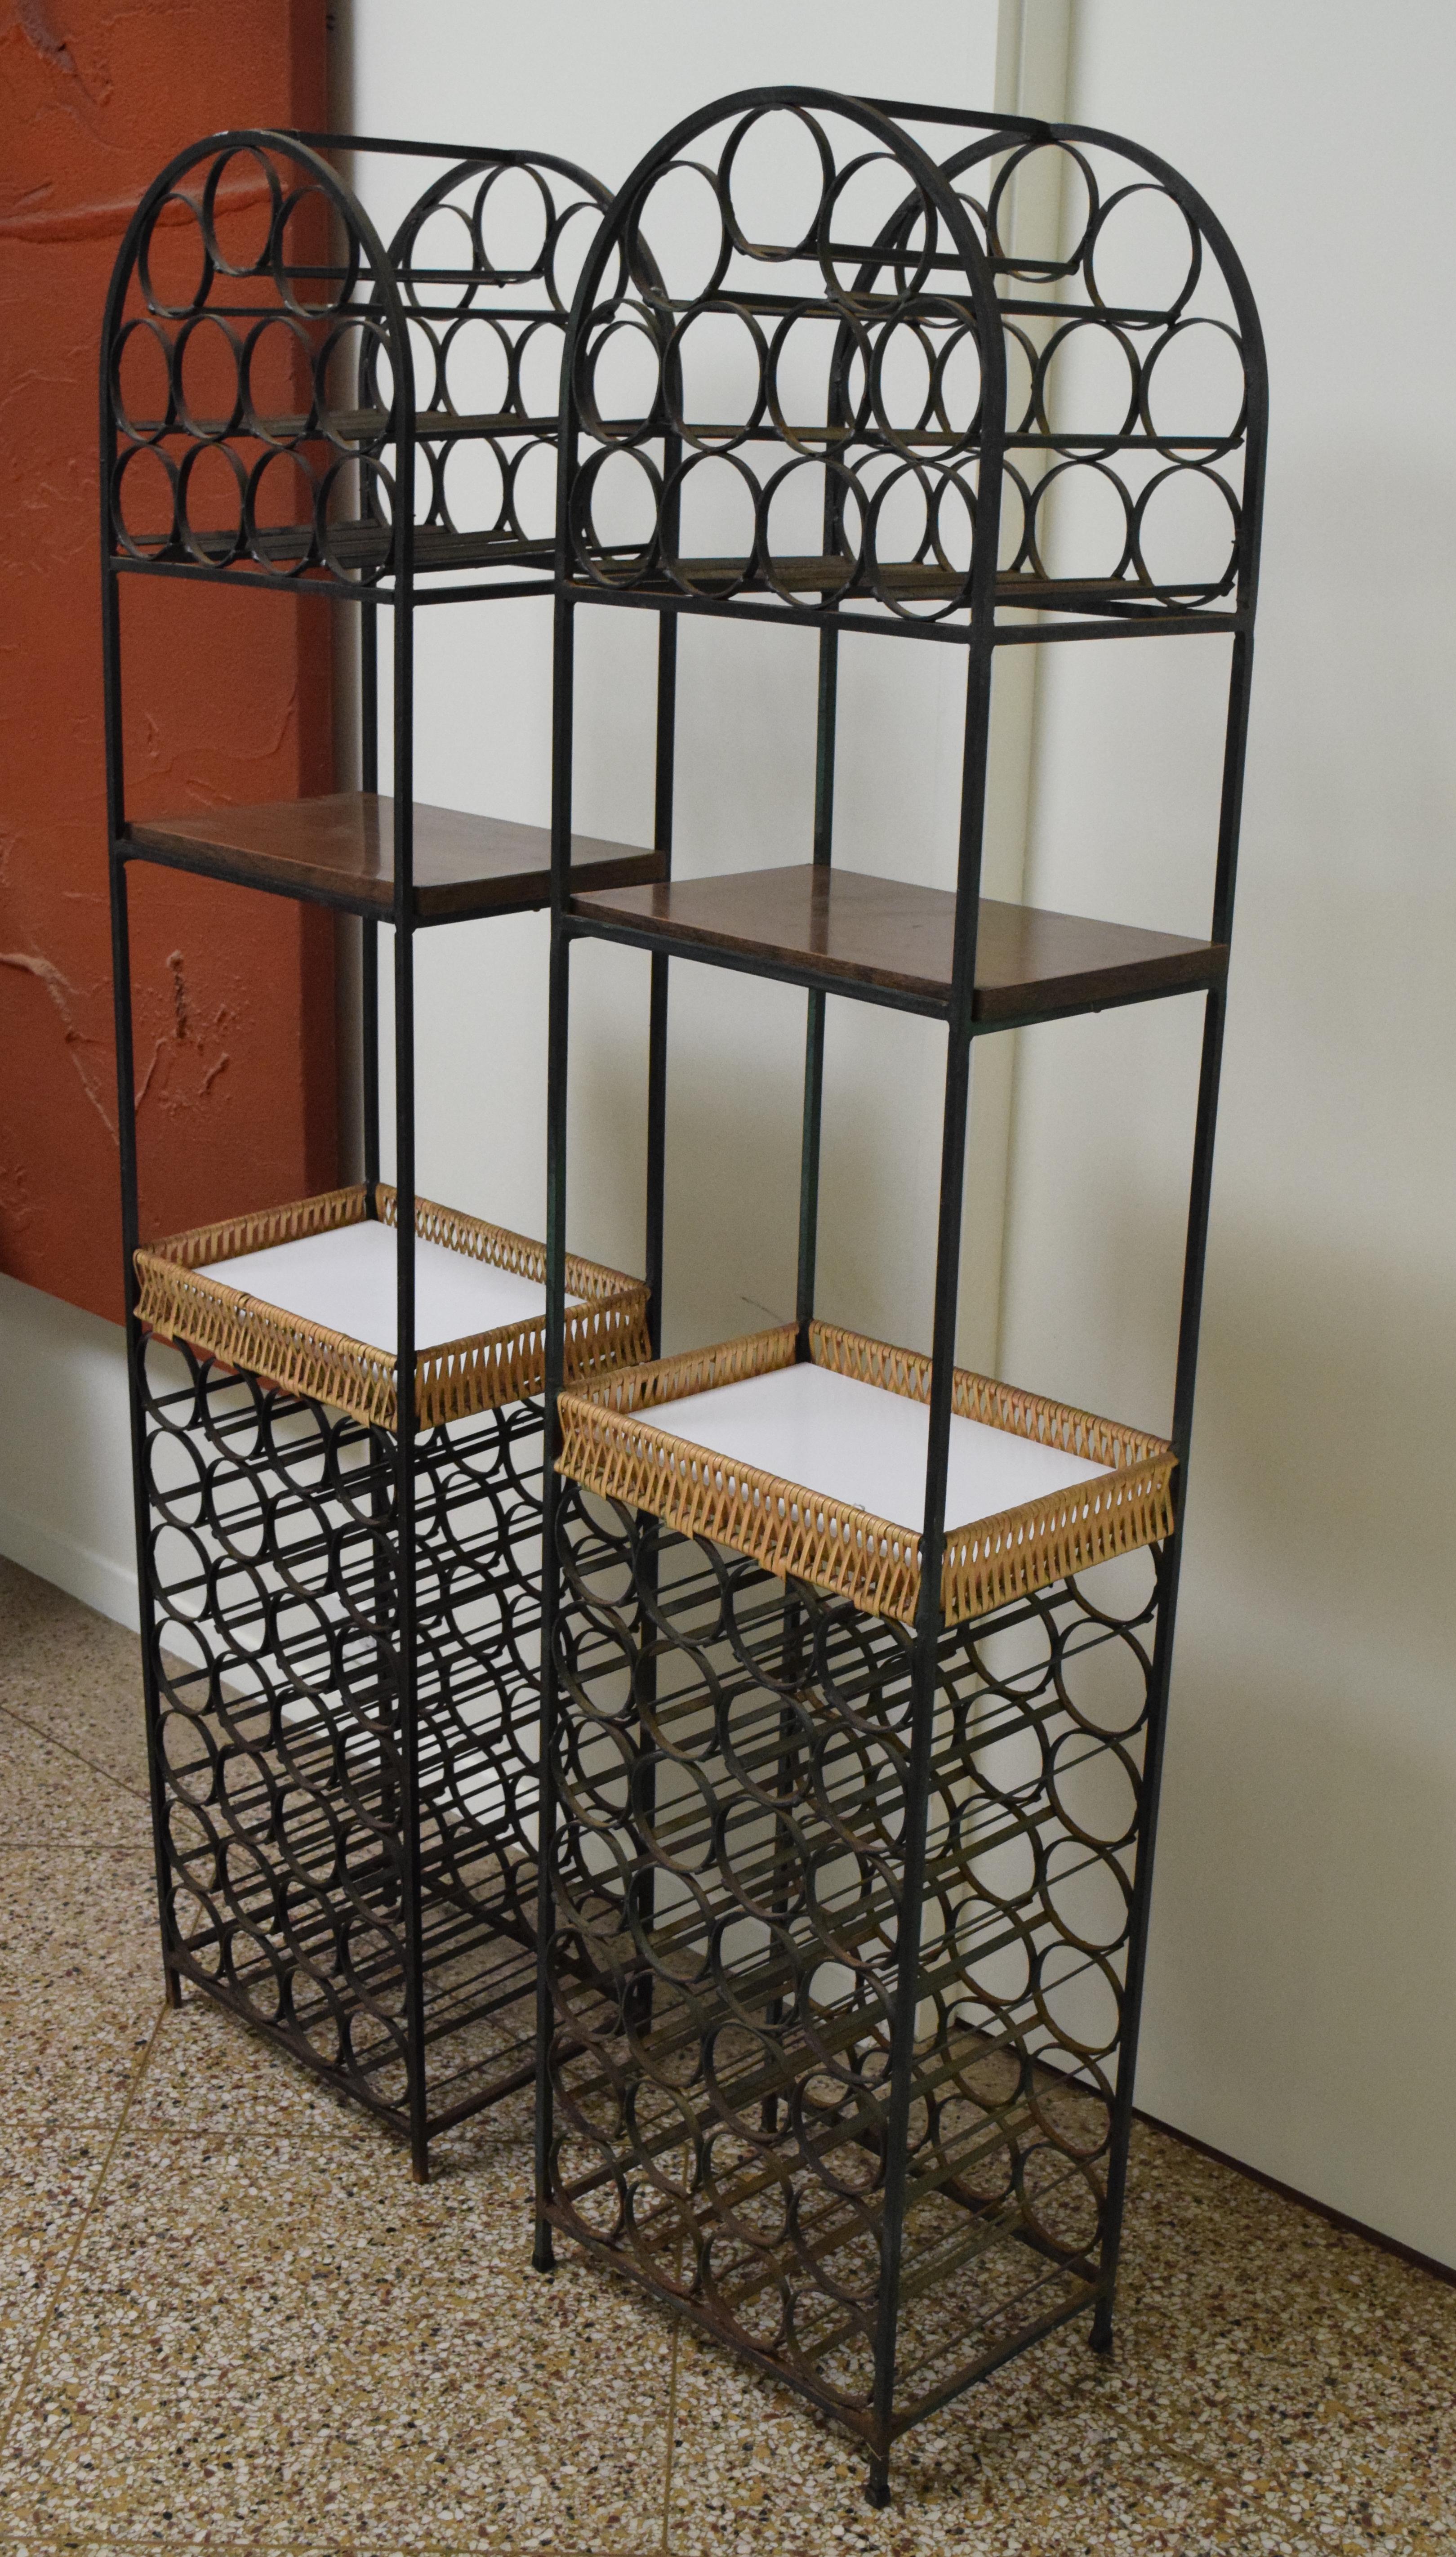 Store closing-- last day is 7/31. Offers welcome! Pair of wrought iron wine racks with wicker basket and laminate shelf designed by Arthur Umanoff for Shaver Howard and distributed by Raymor. 39-bottle capacity. Price is for the pair.

 